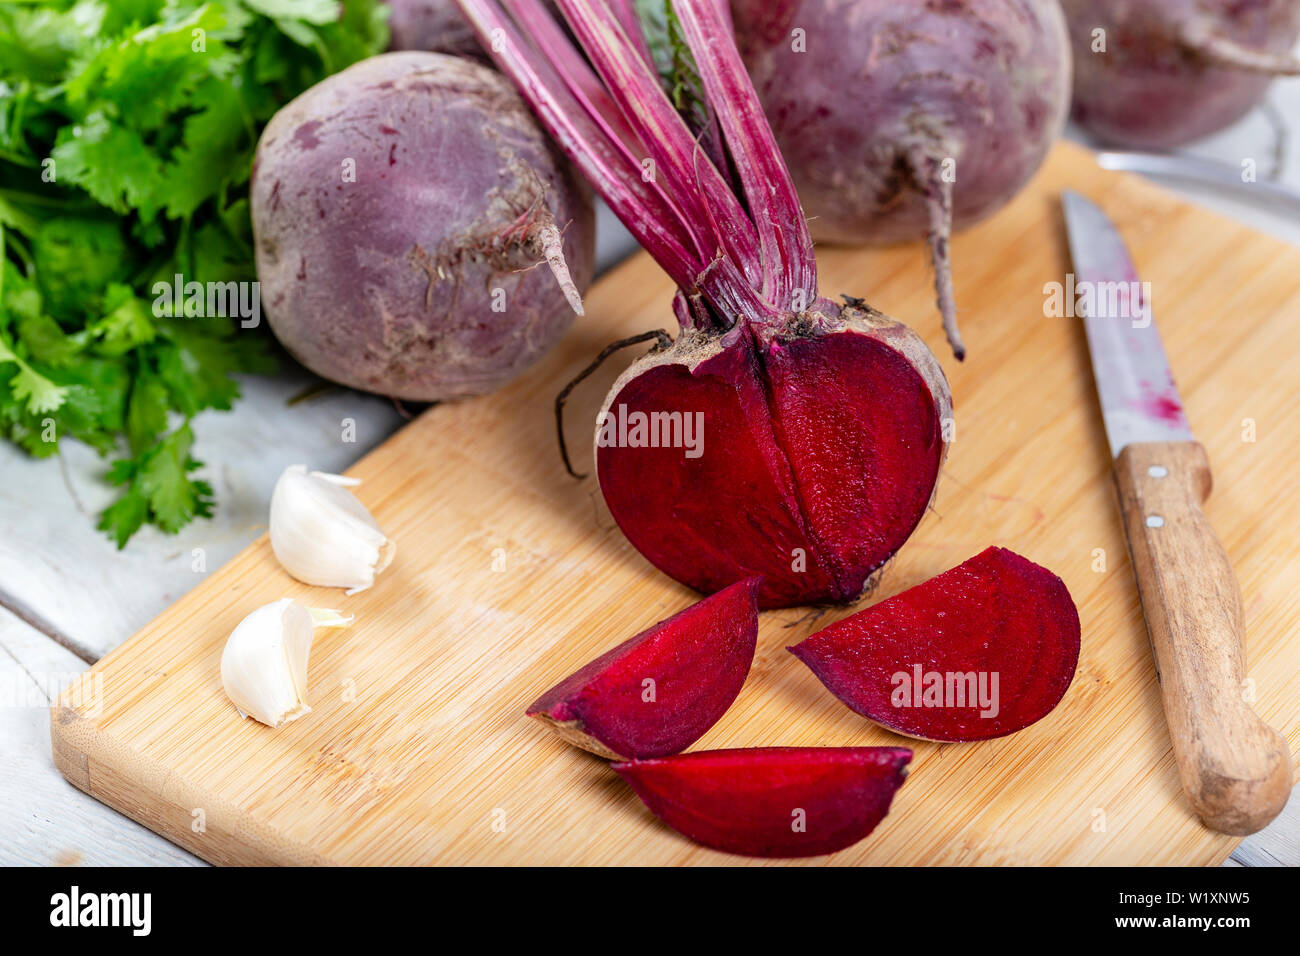 Red Beetroot with herbage green leaves on wooden background Stock Photo